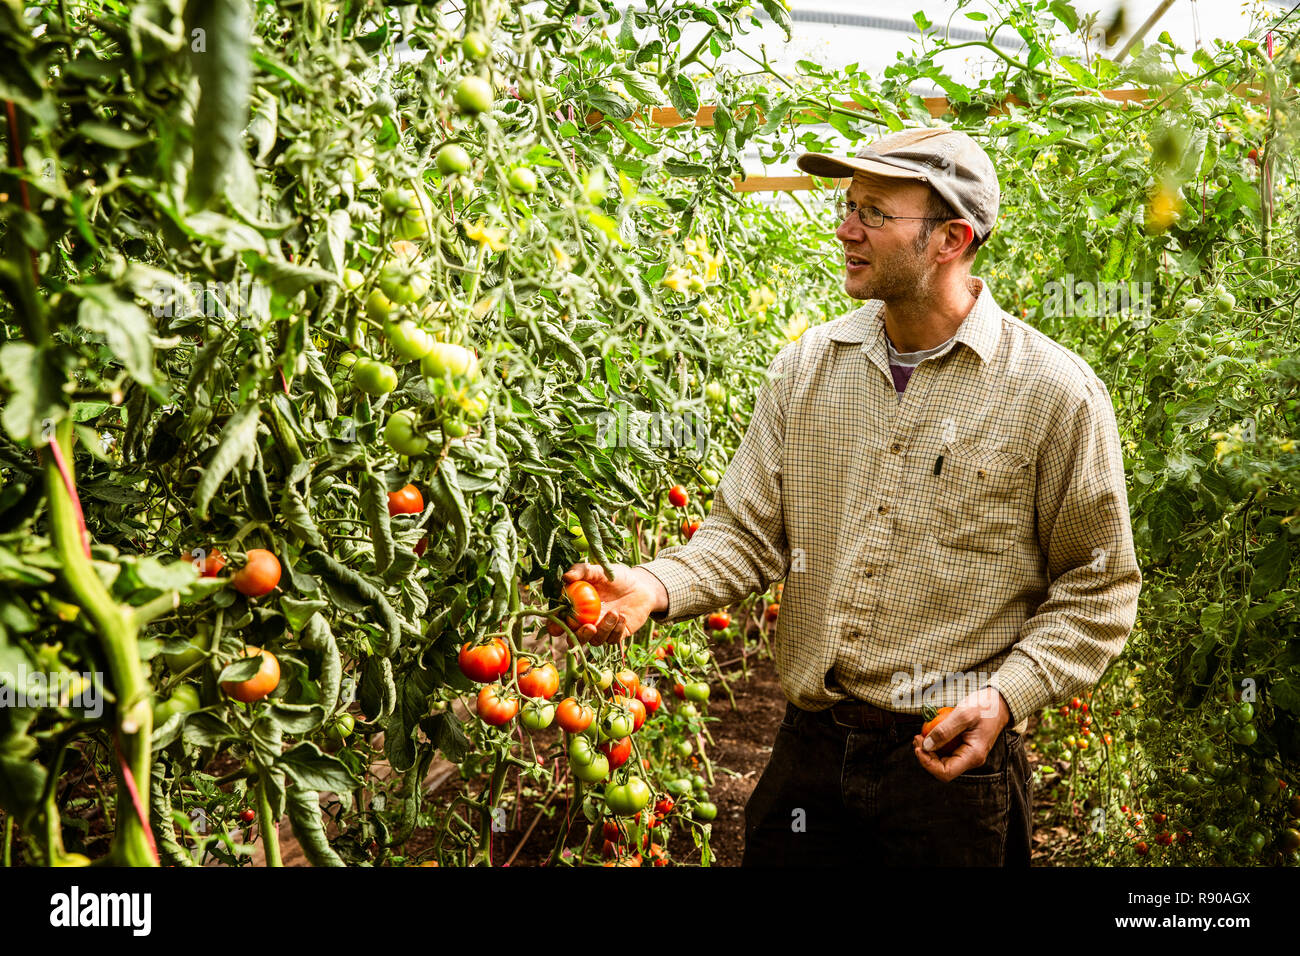 Farmer standing in a field with tomato vines. Stock Photo